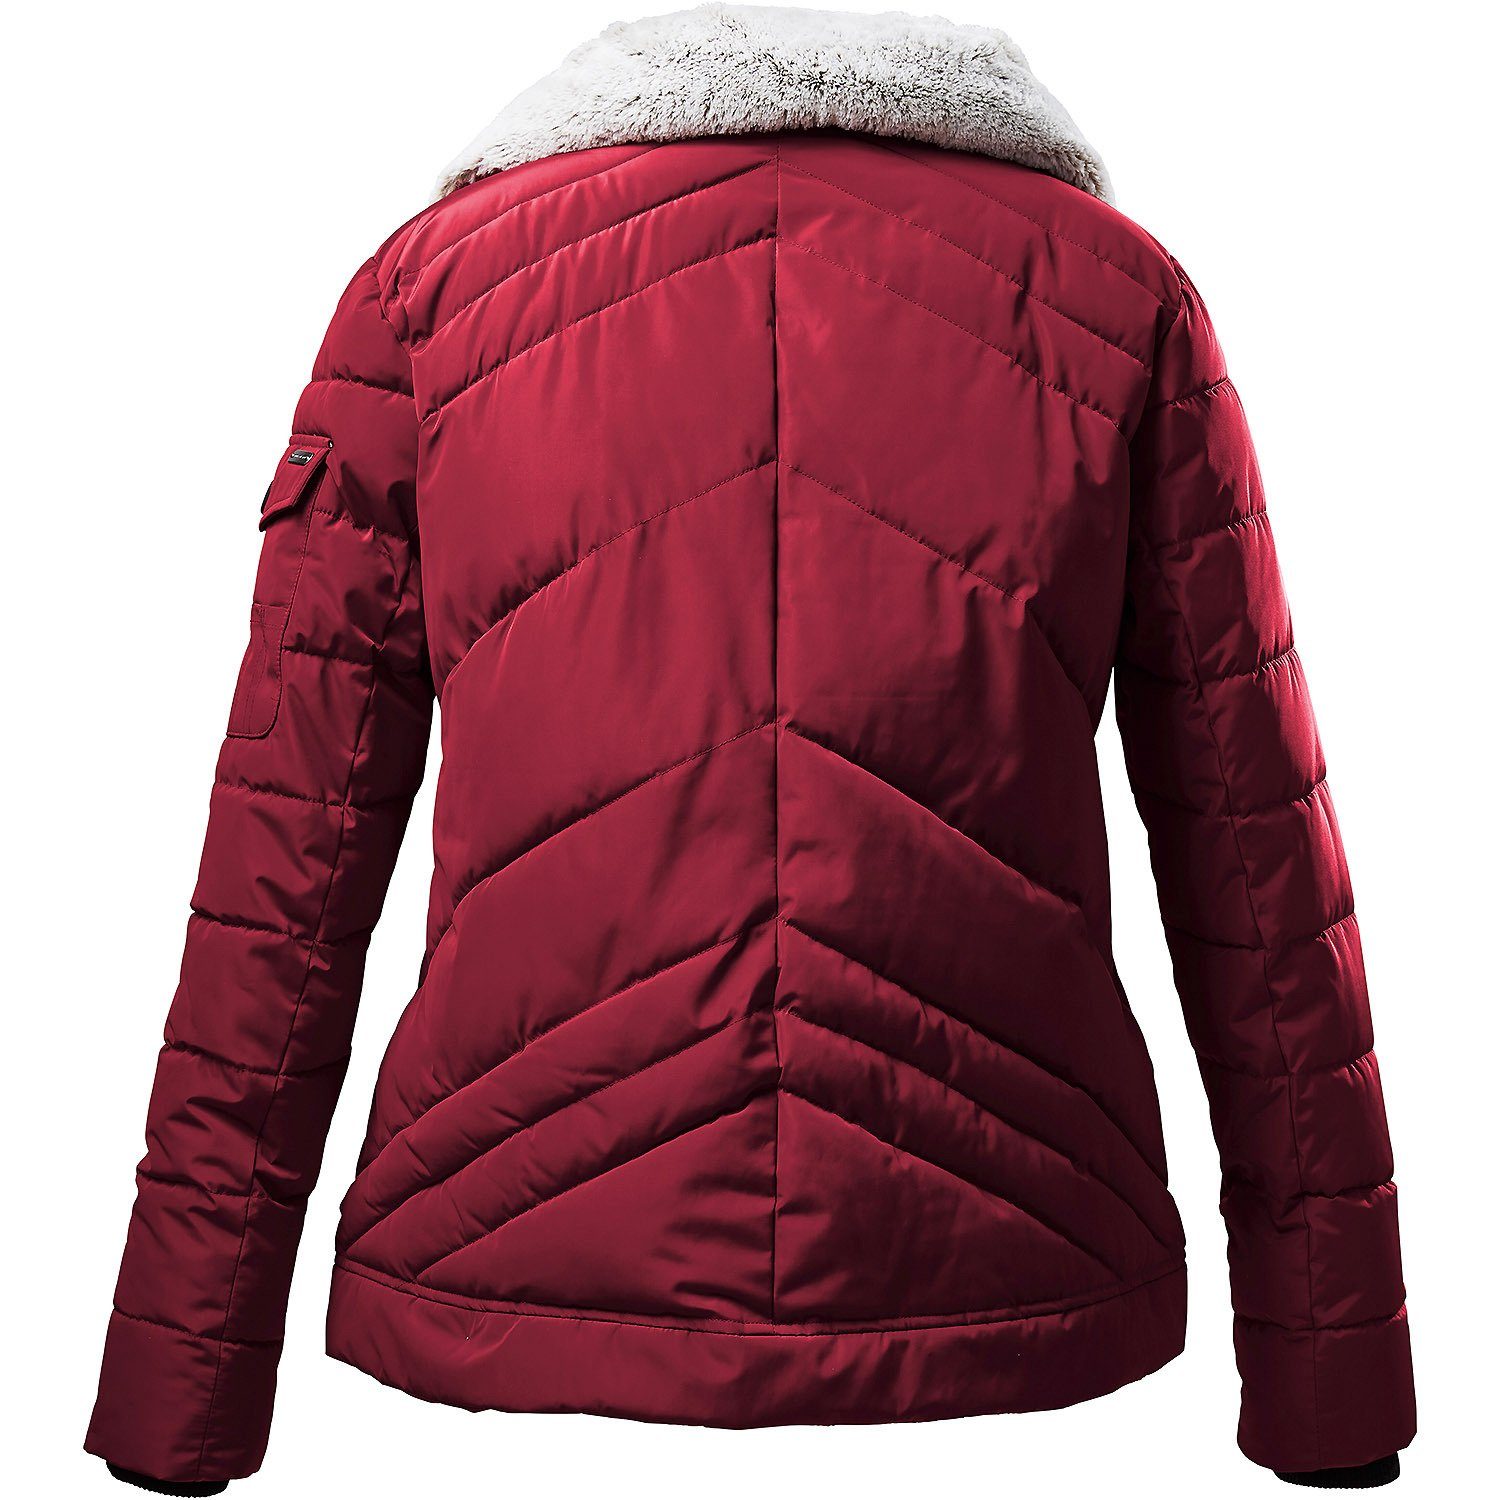 Outdoorjacke Jacke Quilted Dunkelrot A STOY Killtec